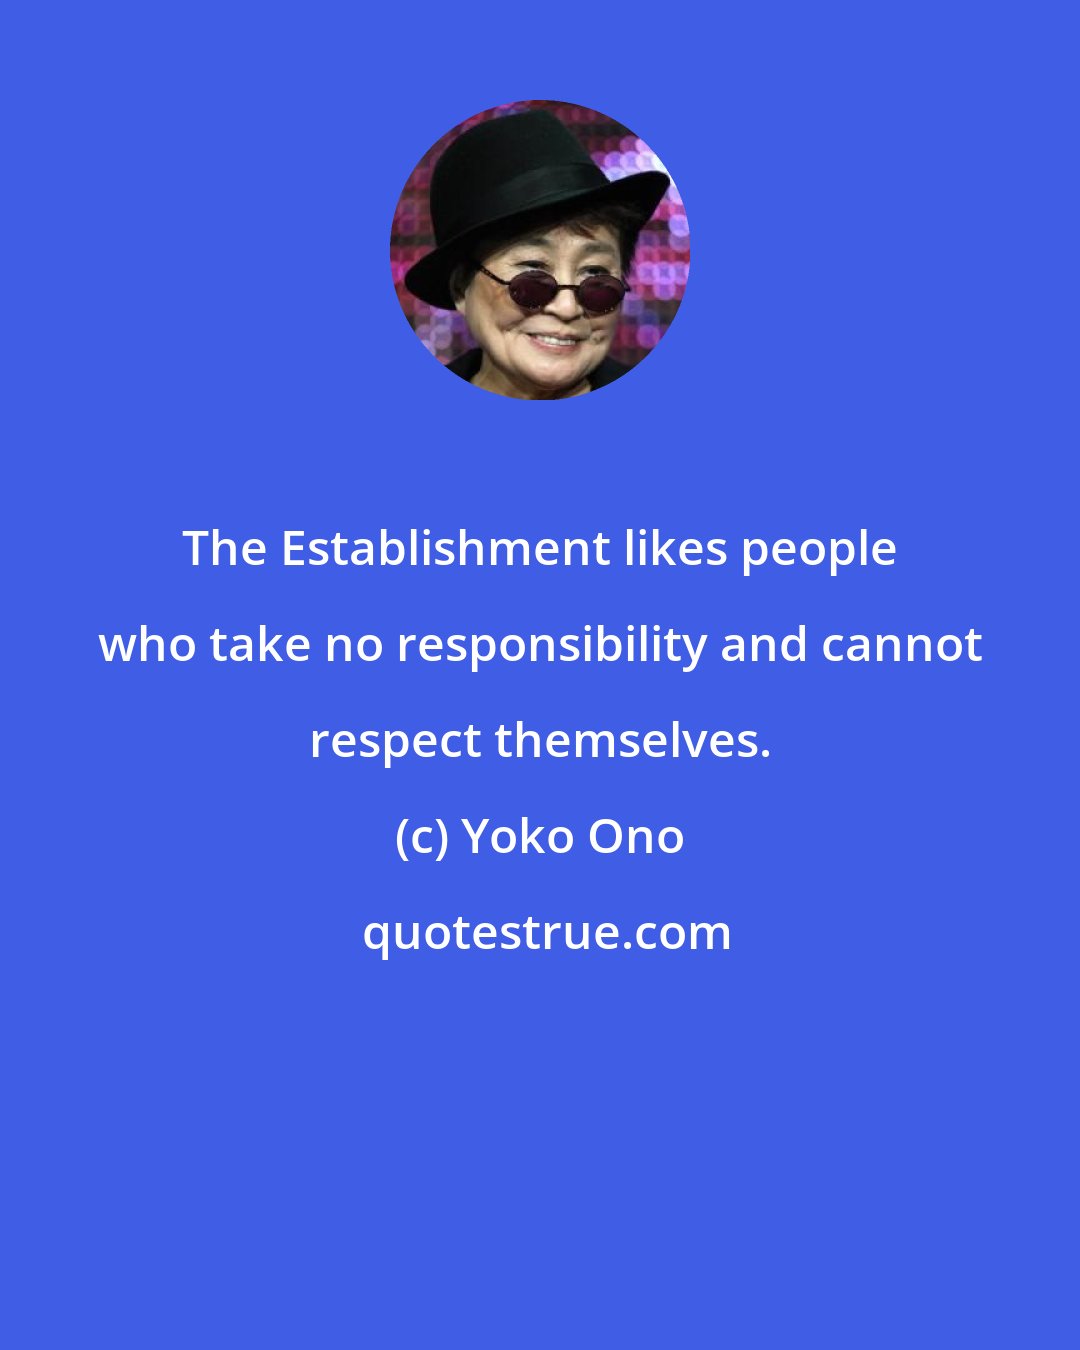 Yoko Ono: The Establishment likes people who take no responsibility and cannot respect themselves.